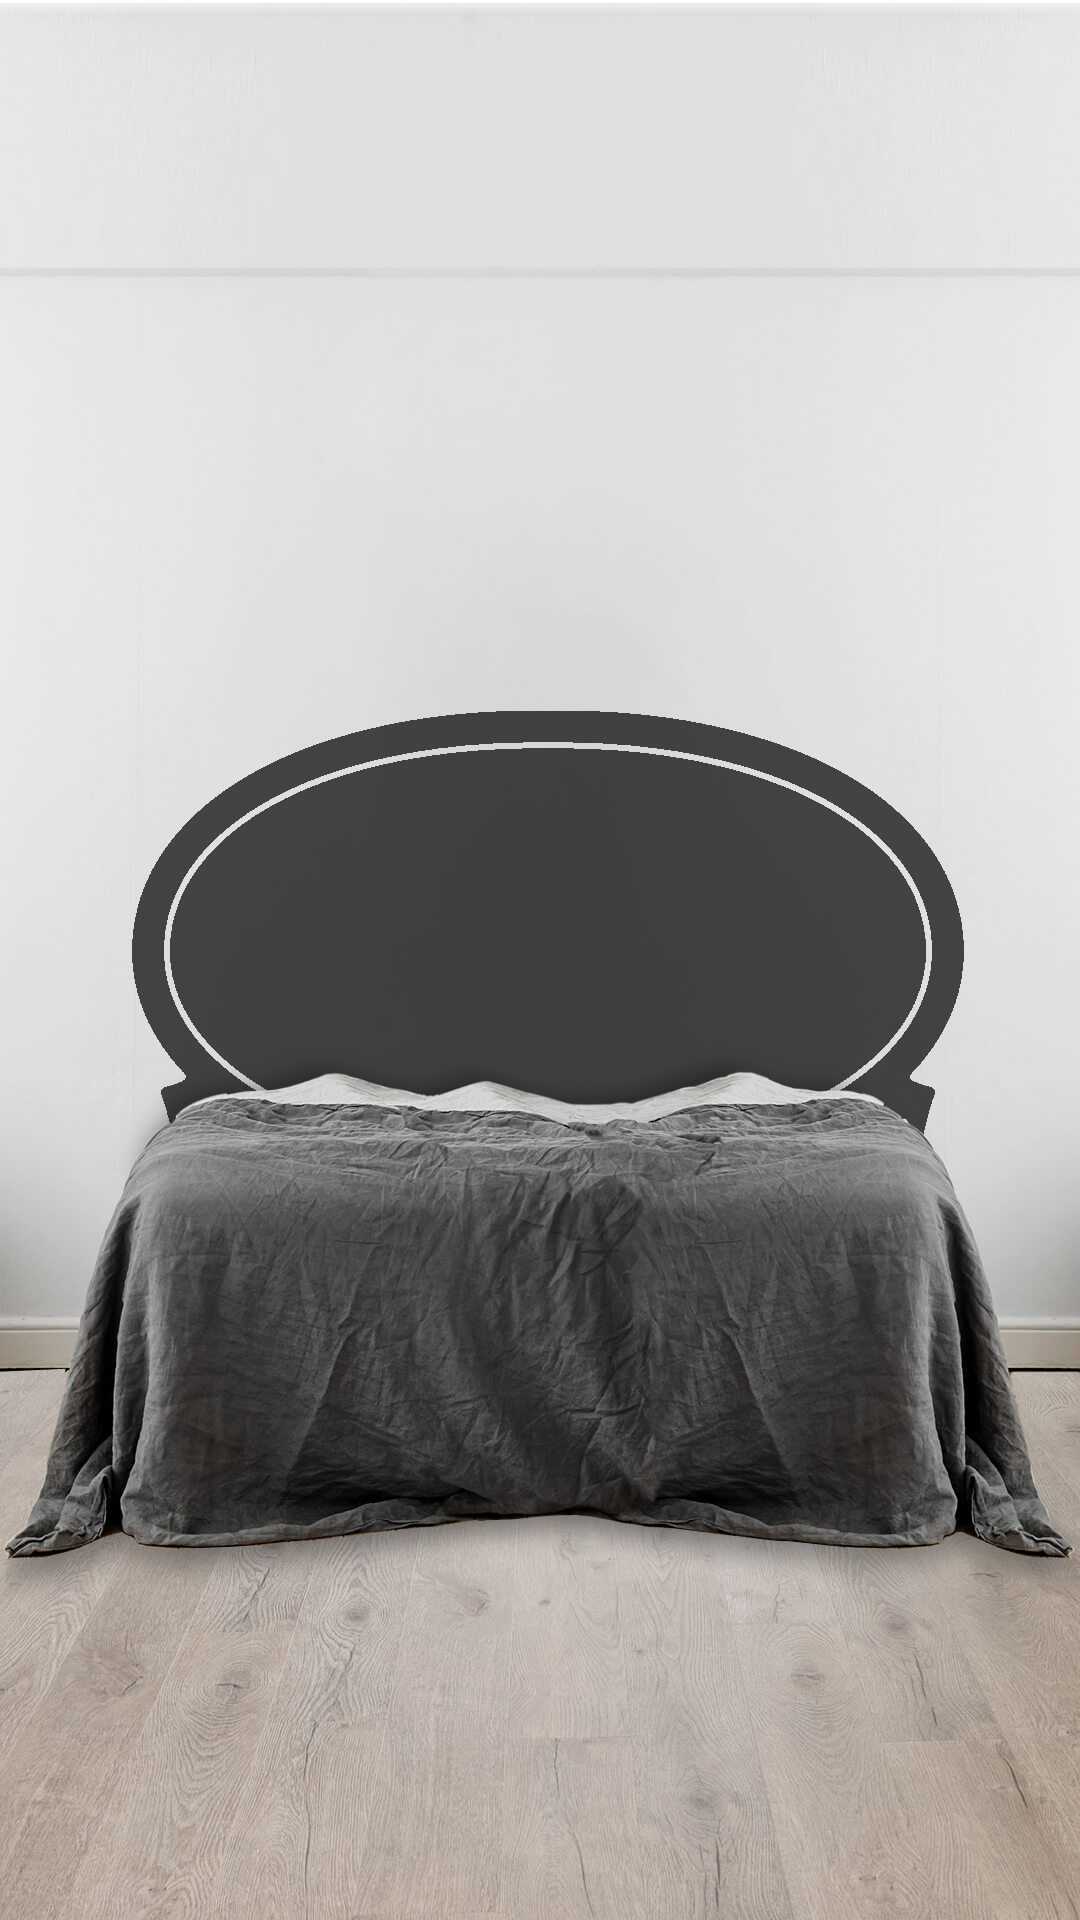 Rounded Sticker Headboard Queen size bed